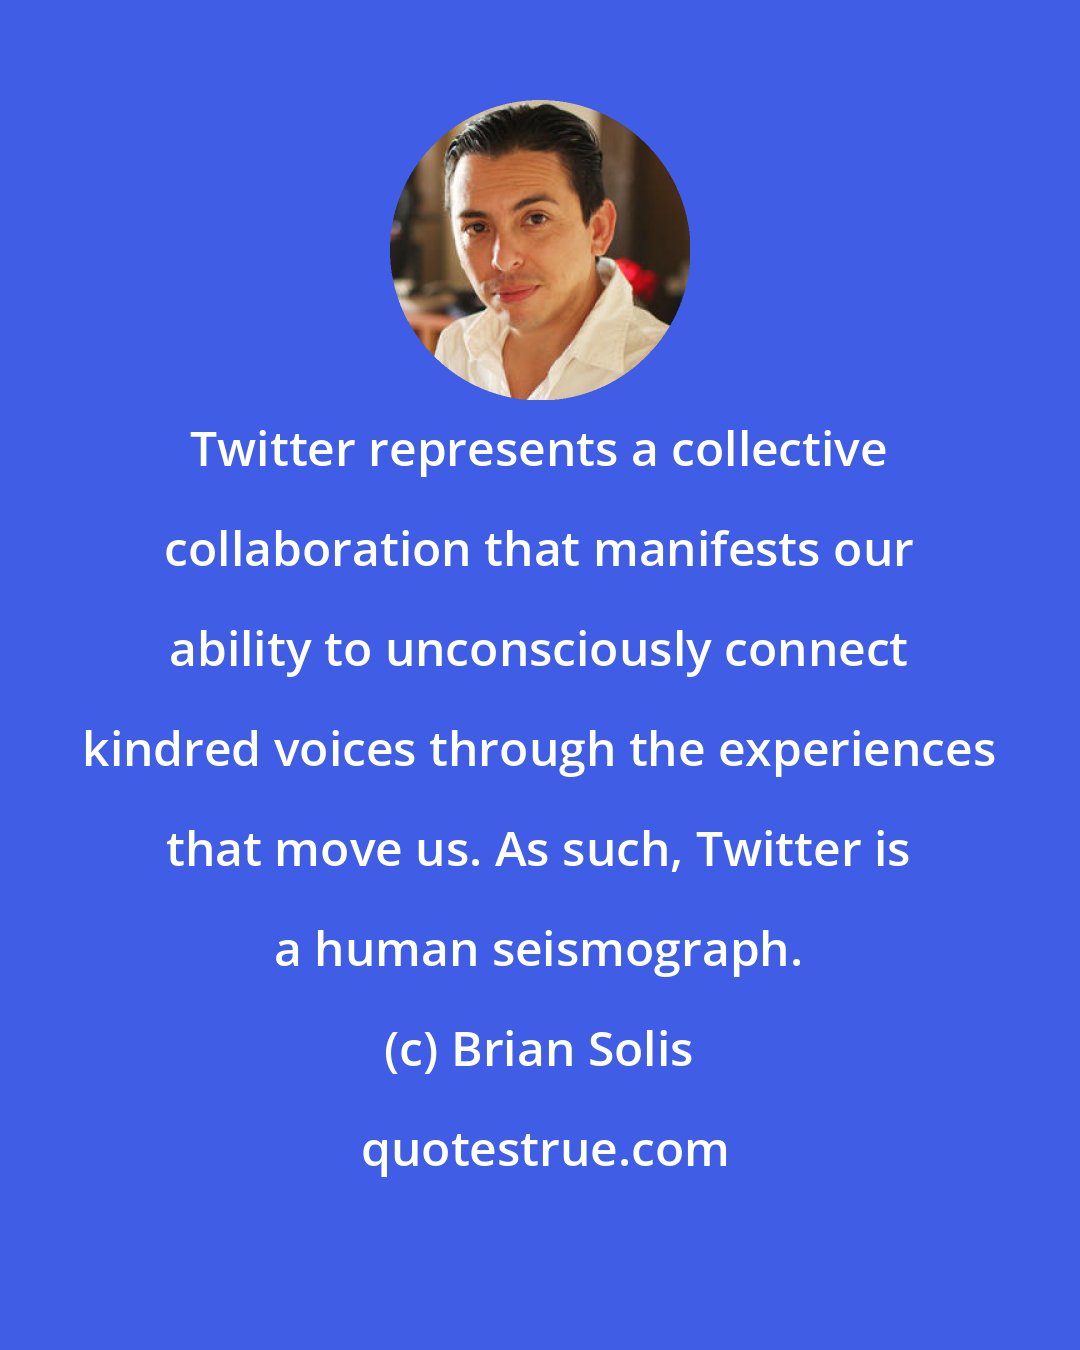 Brian Solis: Twitter represents a collective collaboration that manifests our ability to unconsciously connect kindred voices through the experiences that move us. As such, Twitter is a human seismograph.